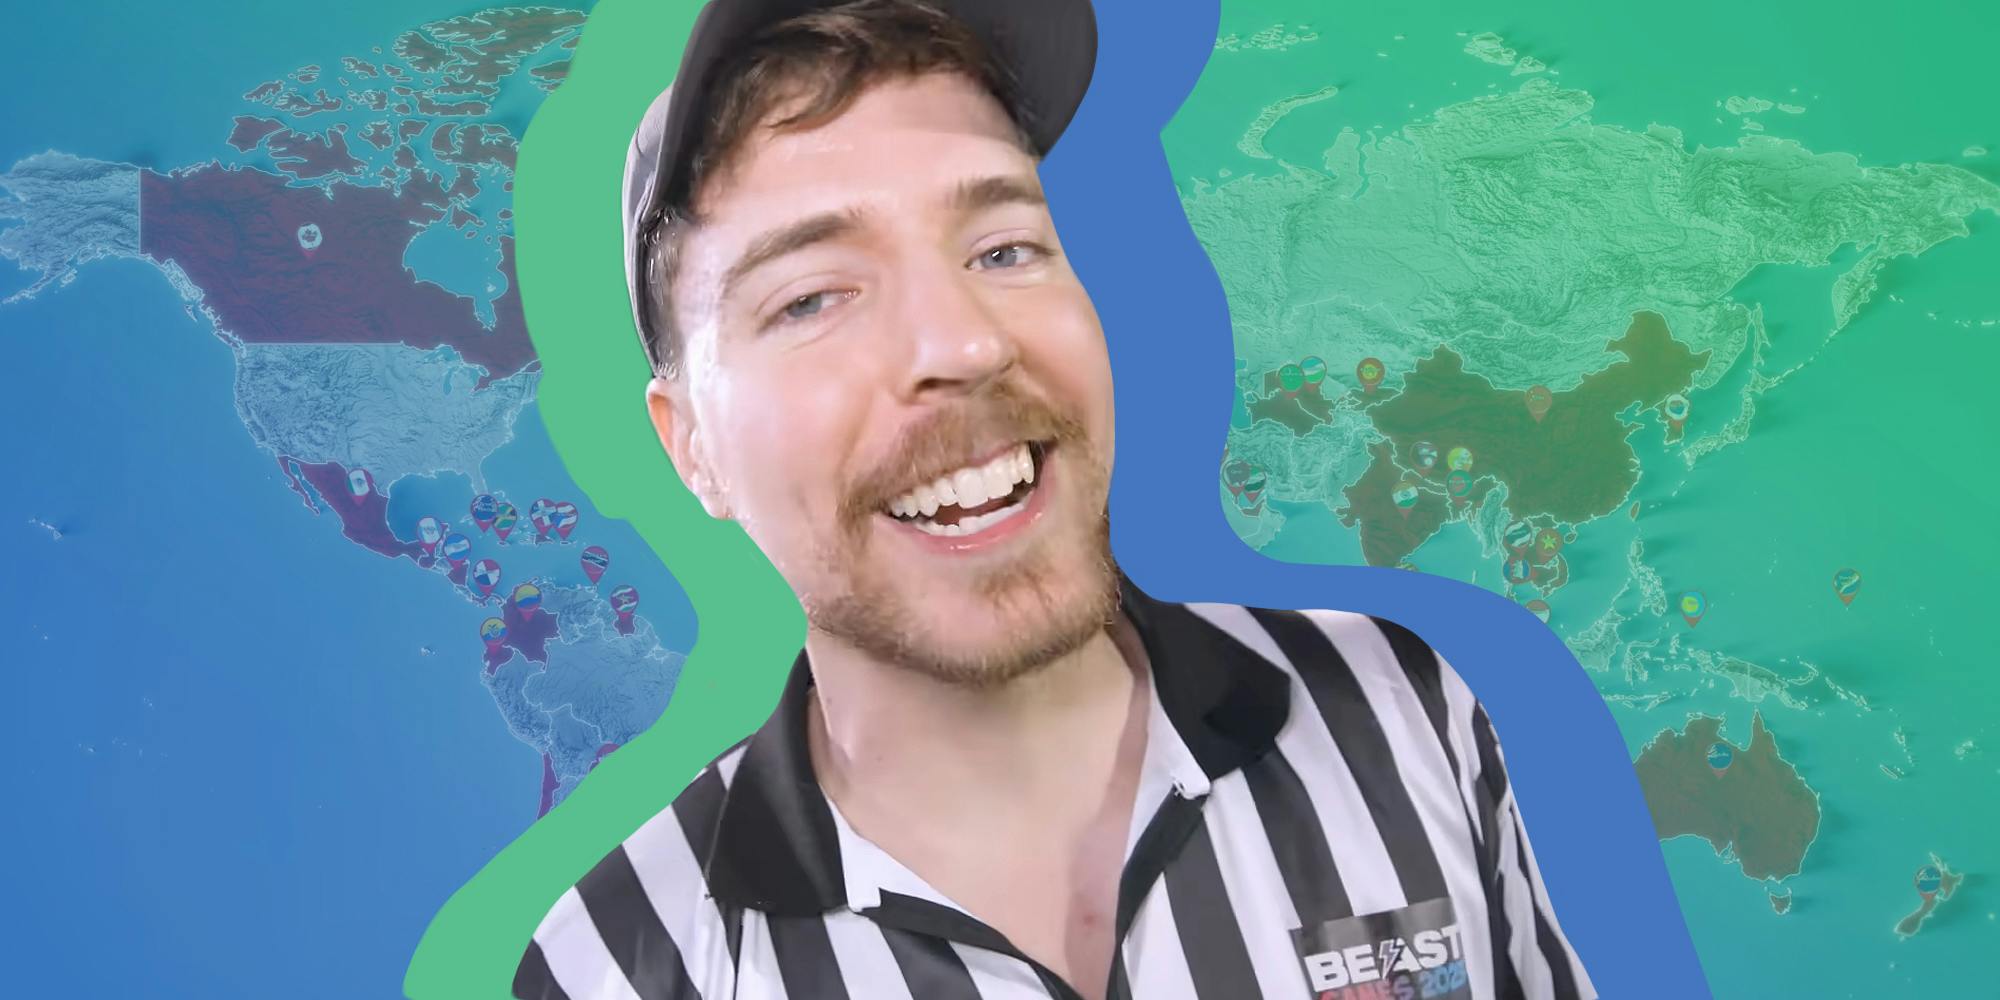 MrBeast's world map didn't include Taiwan but did have Palestine. 